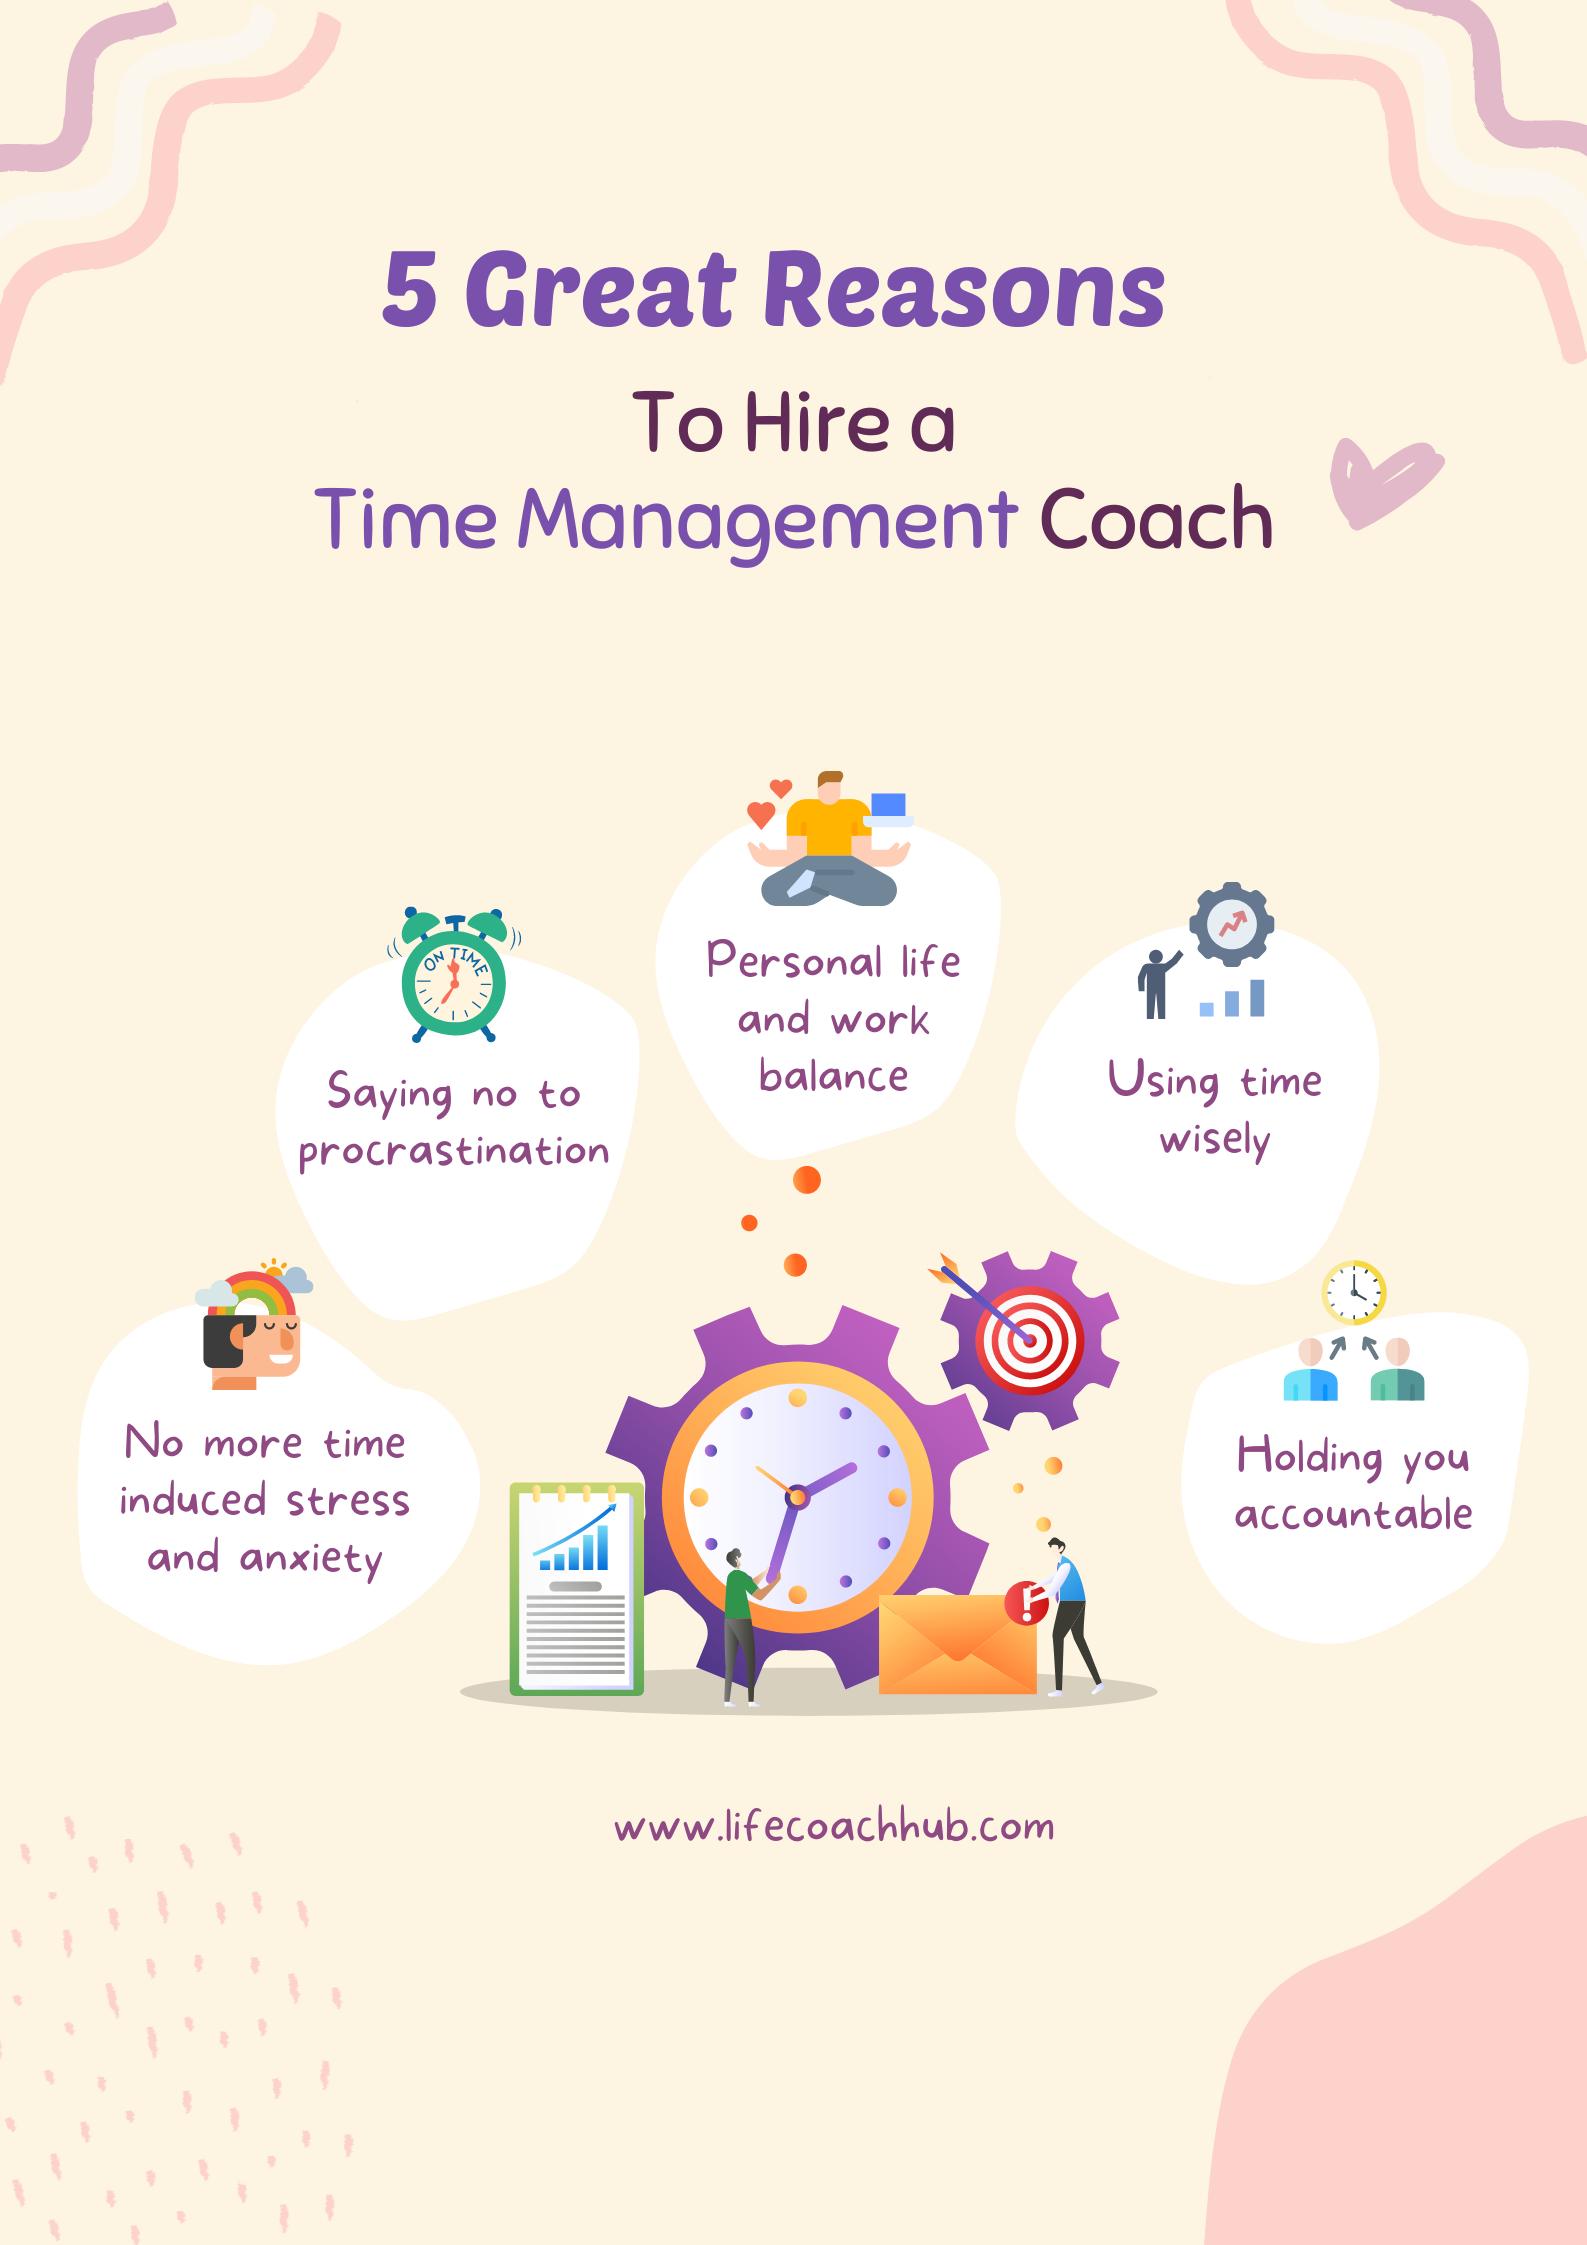 5 great reasons to hire a time management coach